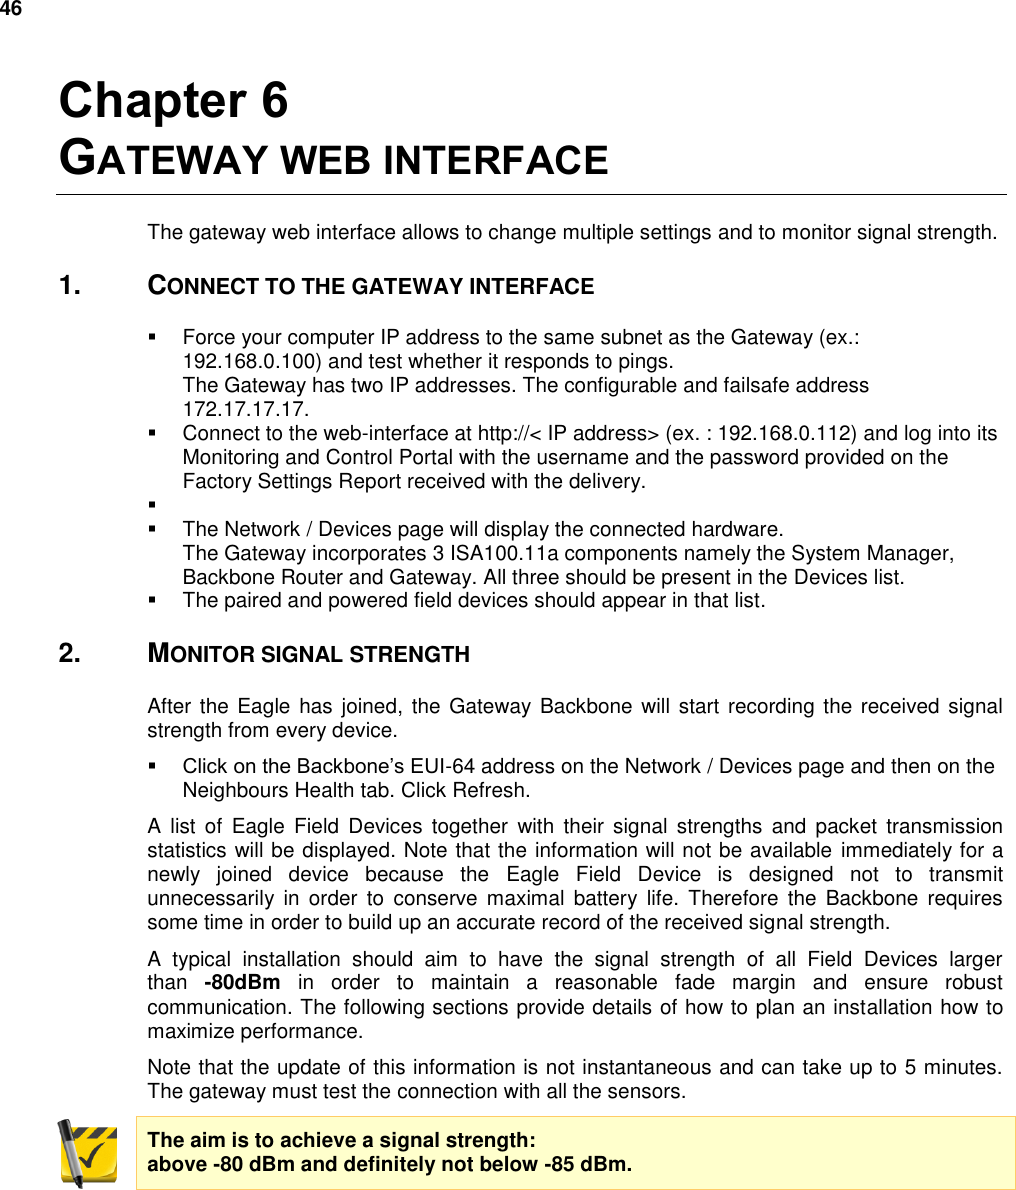 46  Chapter 6 GATEWAY WEB INTERFACE The gateway web interface allows to change multiple settings and to monitor signal strength. 1.  CONNECT TO THE GATEWAY INTERFACE   Force your computer IP address to the same subnet as the Gateway (ex.: 192.168.0.100) and test whether it responds to pings. The Gateway has two IP addresses. The configurable and failsafe address 172.17.17.17.   Connect to the web-interface at http://&lt; IP address&gt; (ex. : 192.168.0.112) and log into its Monitoring and Control Portal with the username and the password provided on the Factory Settings Report received with the delivery.      The Network / Devices page will display the connected hardware. The Gateway incorporates 3 ISA100.11a components namely the System Manager, Backbone Router and Gateway. All three should be present in the Devices list.   The paired and powered field devices should appear in that list. 2.  MONITOR SIGNAL STRENGTH After the Eagle  has joined,  the  Gateway Backbone  will  start recording the  received signal strength from every device.  Click on the Backbone’s EUI-64 address on the Network / Devices page and then on the Neighbours Health tab. Click Refresh. A  list  of  Eagle  Field  Devices  together  with  their  signal  strengths  and  packet transmission statistics will be displayed. Note that the information will not be available immediately for a newly  joined  device  because  the  Eagle  Field  Device  is  designed  not  to  transmit unnecessarily  in  order  to  conserve maximal  battery  life.  Therefore  the  Backbone  requires some time in order to build up an accurate record of the received signal strength. A  typical  installation  should  aim  to  have  the  signal  strength  of  all  Field  Devices  larger than  -80dBm  in  order  to  maintain  a  reasonable  fade  margin  and  ensure  robust communication. The following sections provide details of how to plan an installation how to maximize performance. Note that the update of this information is not instantaneous and can take up to 5 minutes. The gateway must test the connection with all the sensors. The aim is to achieve a signal strength: above -80 dBm and definitely not below -85 dBm.    